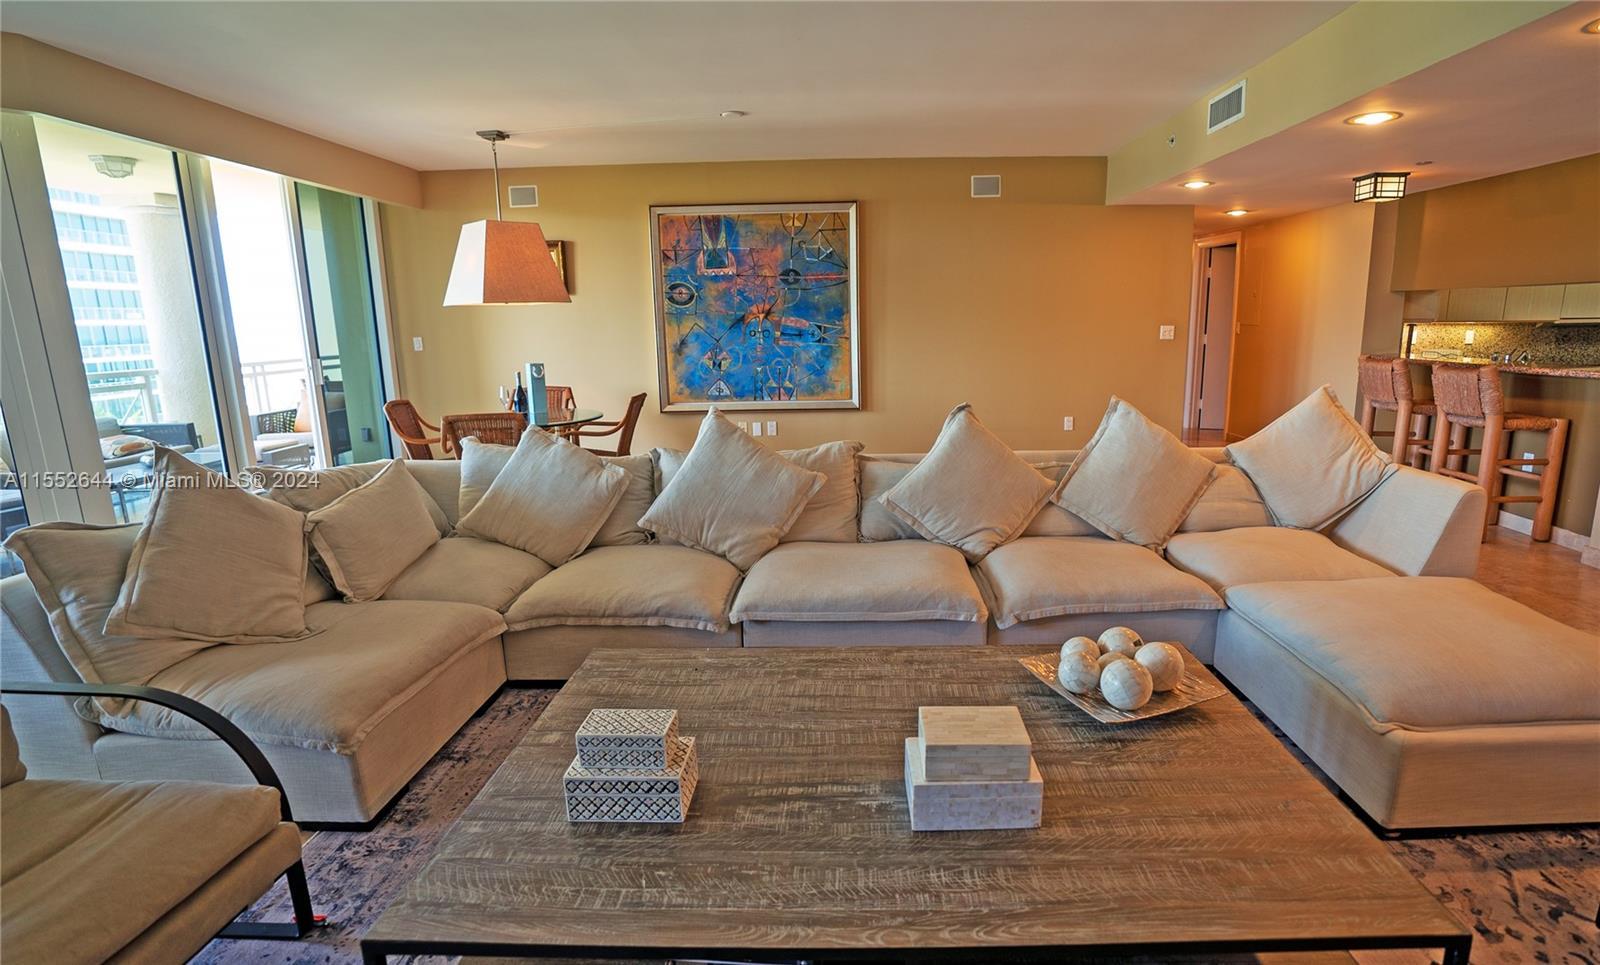 The generously sized 4/4 unit, measuring an impressive 2,930 sf, WITH OCEAN VIEWS, presents a grand 